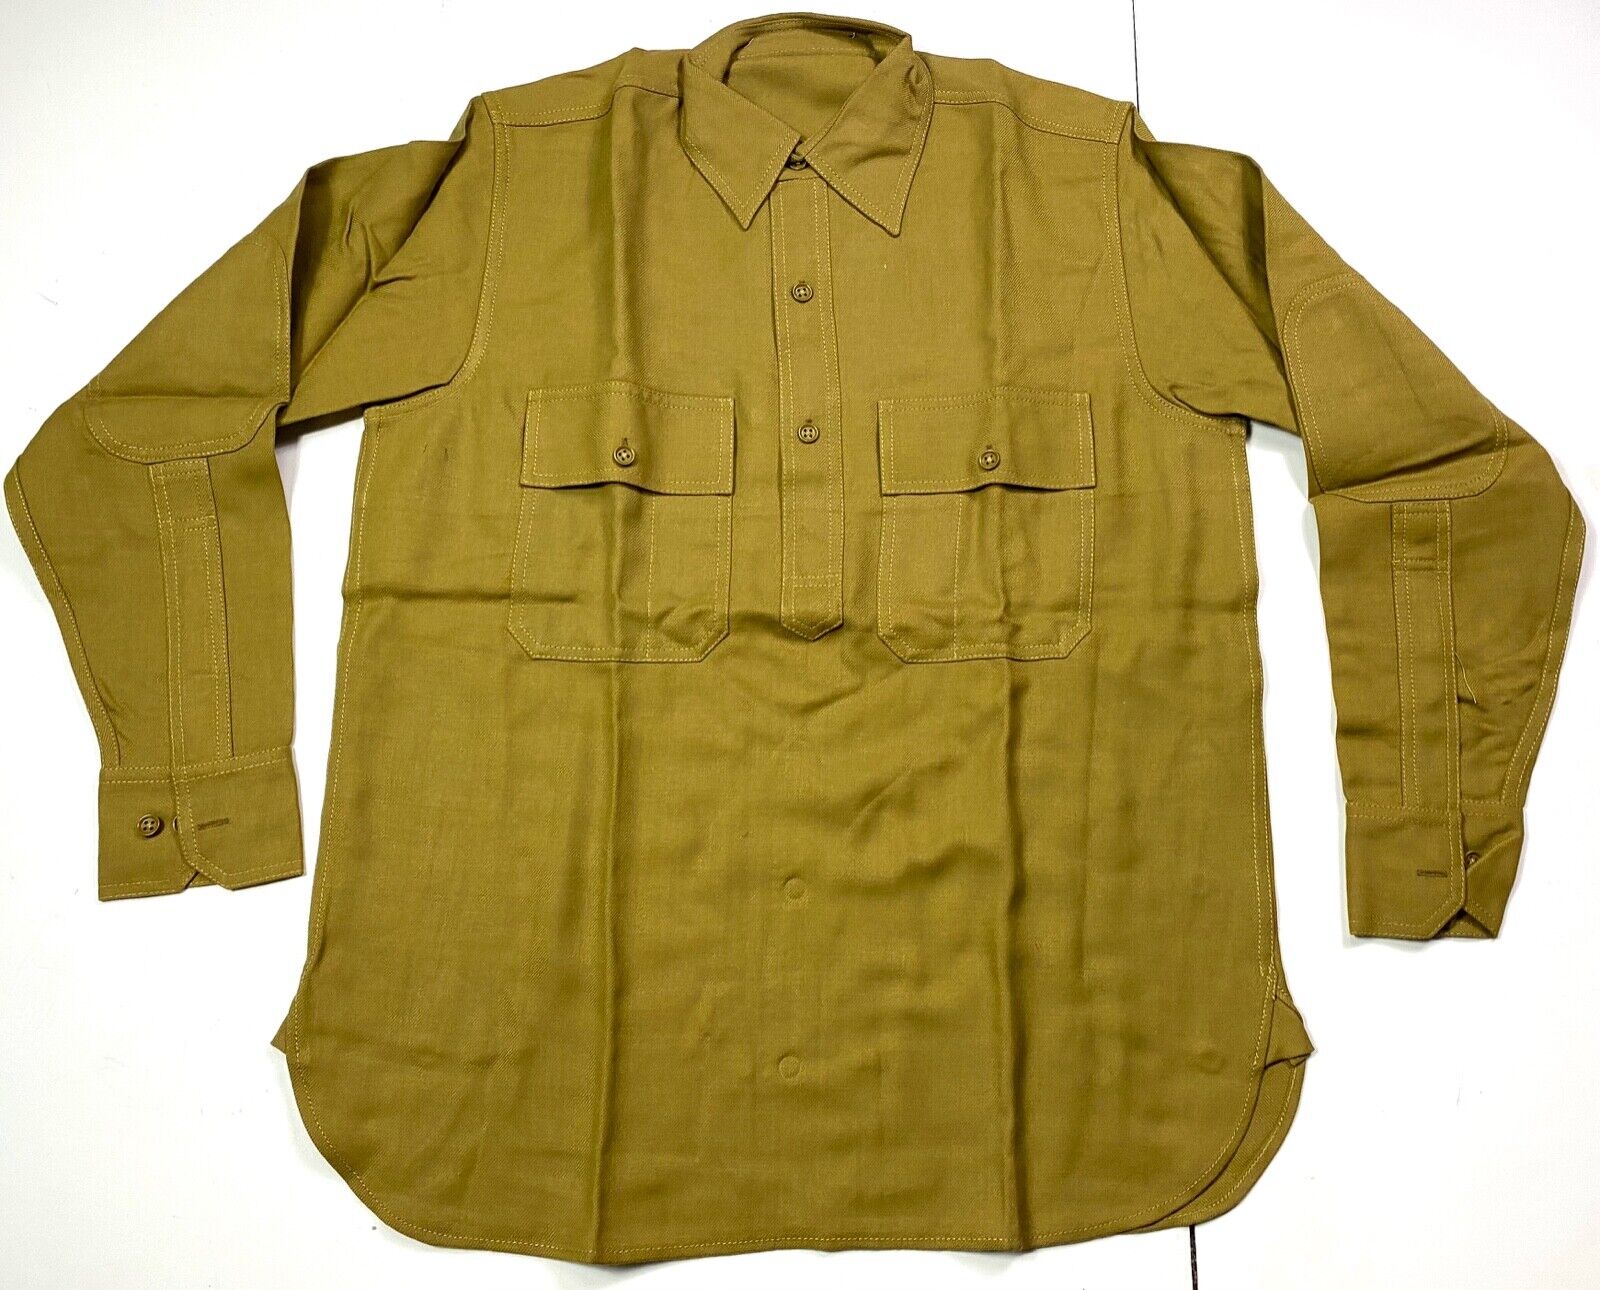 WWI US ARMY M1917 WOOL FLANNEL COMBAT FIELD SERVICE SHIRT-LARGE 44R